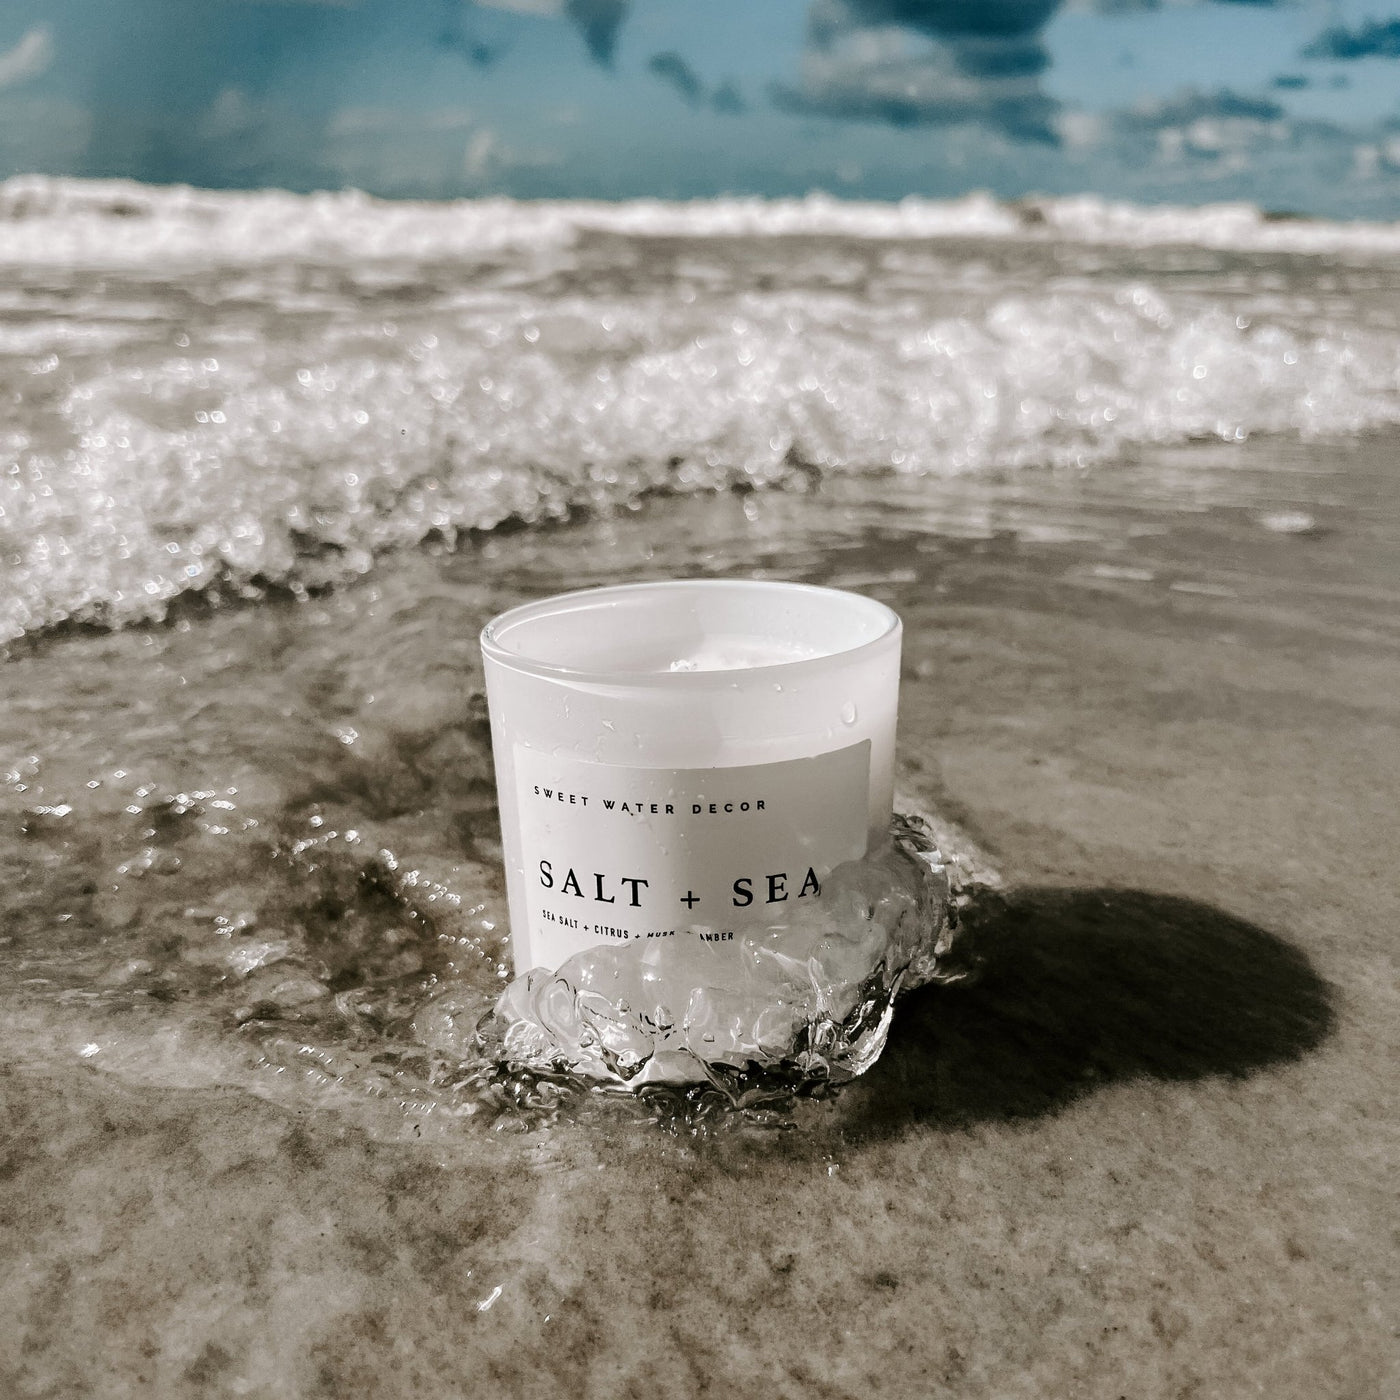 Salt and Sea Soy Candle - White Jar - 11 oz - Sweet Water Decor - Candles